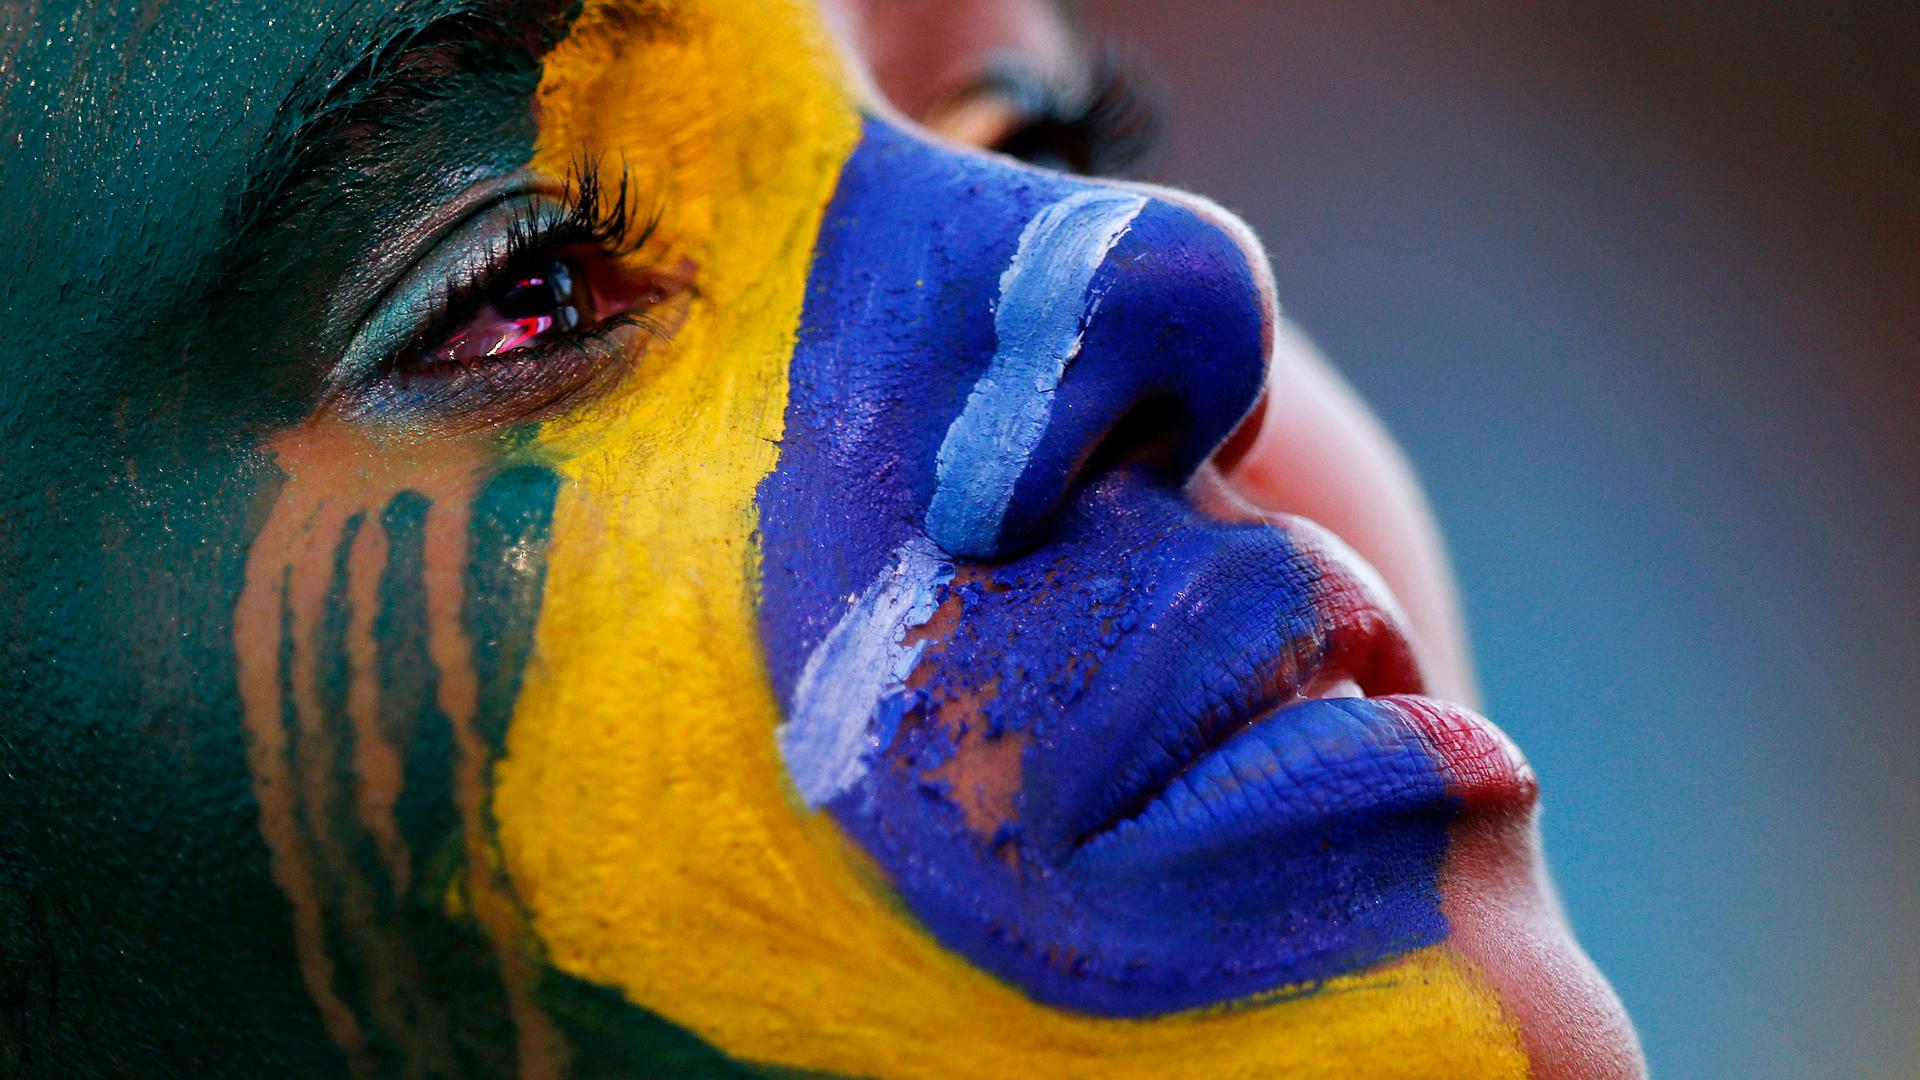 A Brazil fan cries as she watches the 2014 World Cup semi-final between Brazil and Germany at a fan area in Brasilia. Germany scored five goals in 18 astonishing first-half minutes on their way to a 7-1 semi-final mauling of Brazil on Tuesday.